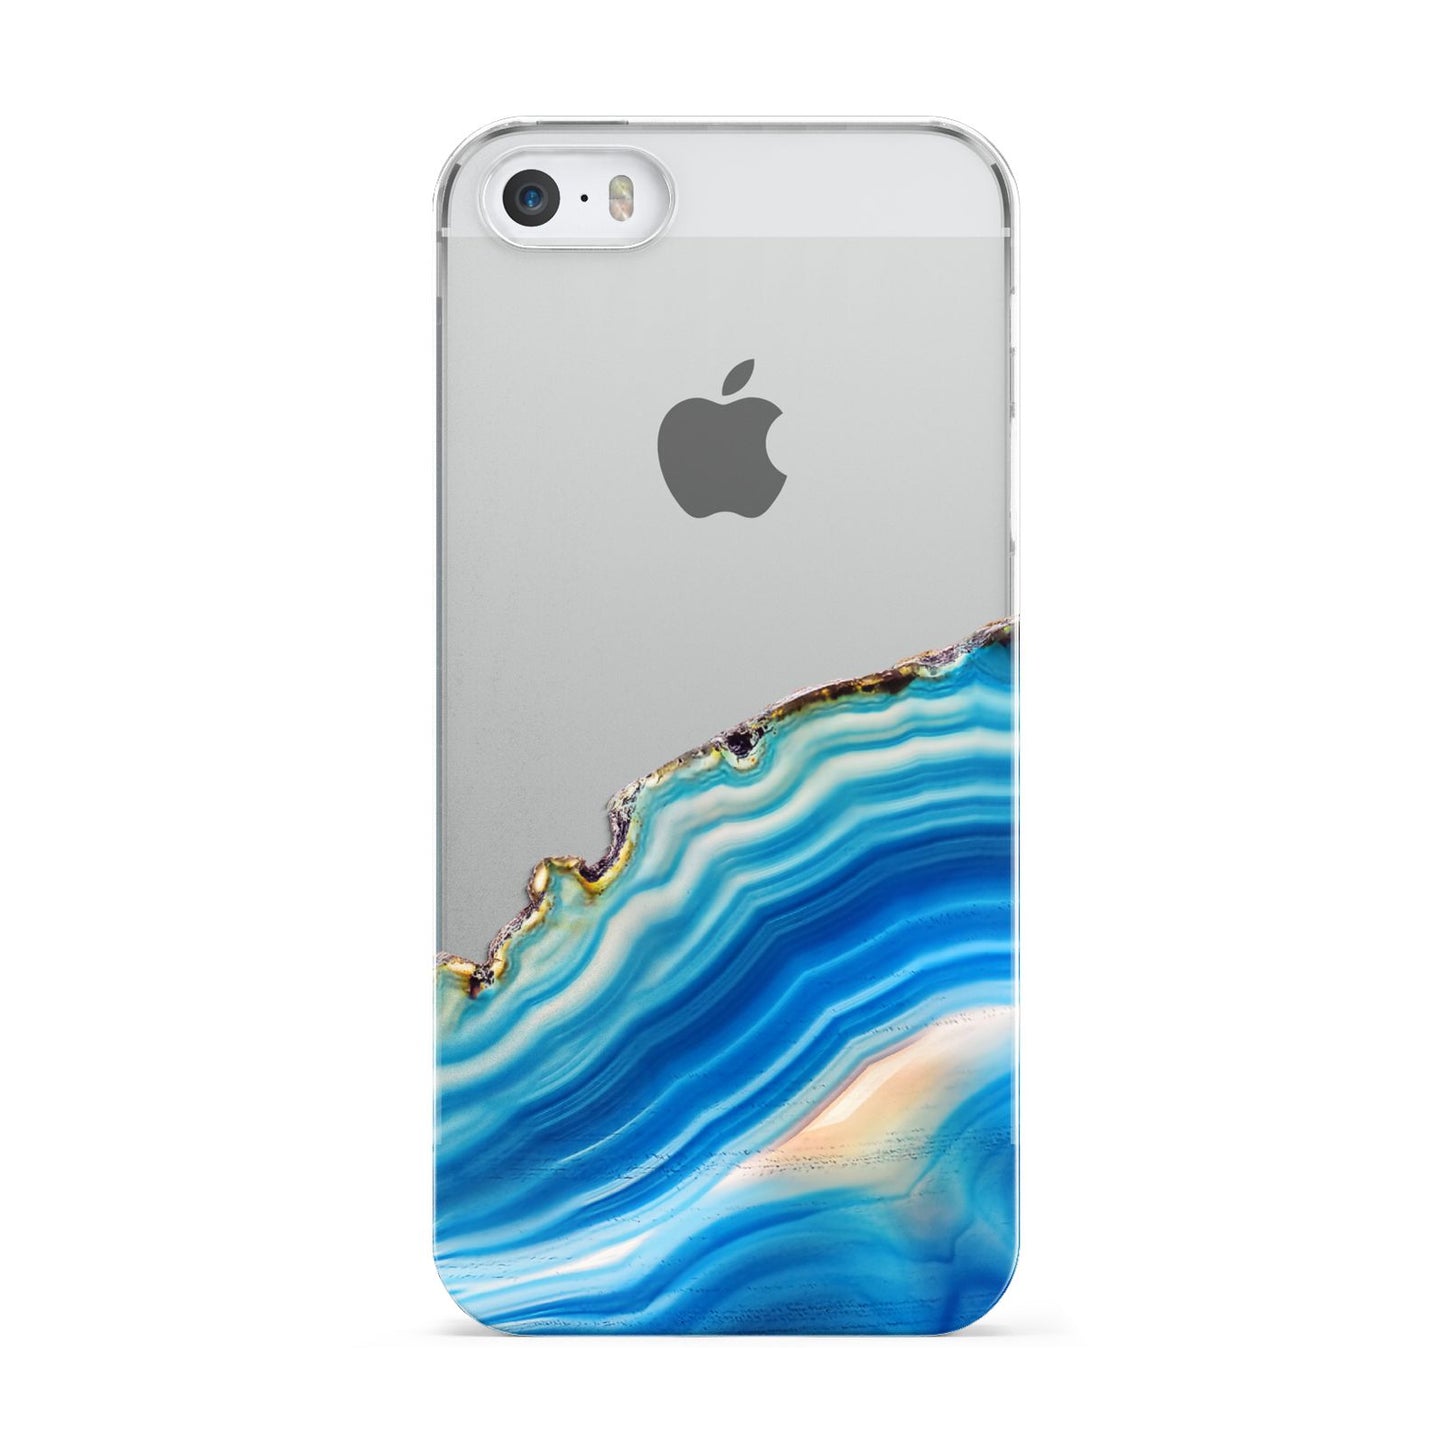 Agate Pale Blue and Bright Blue Apple iPhone 5 Case